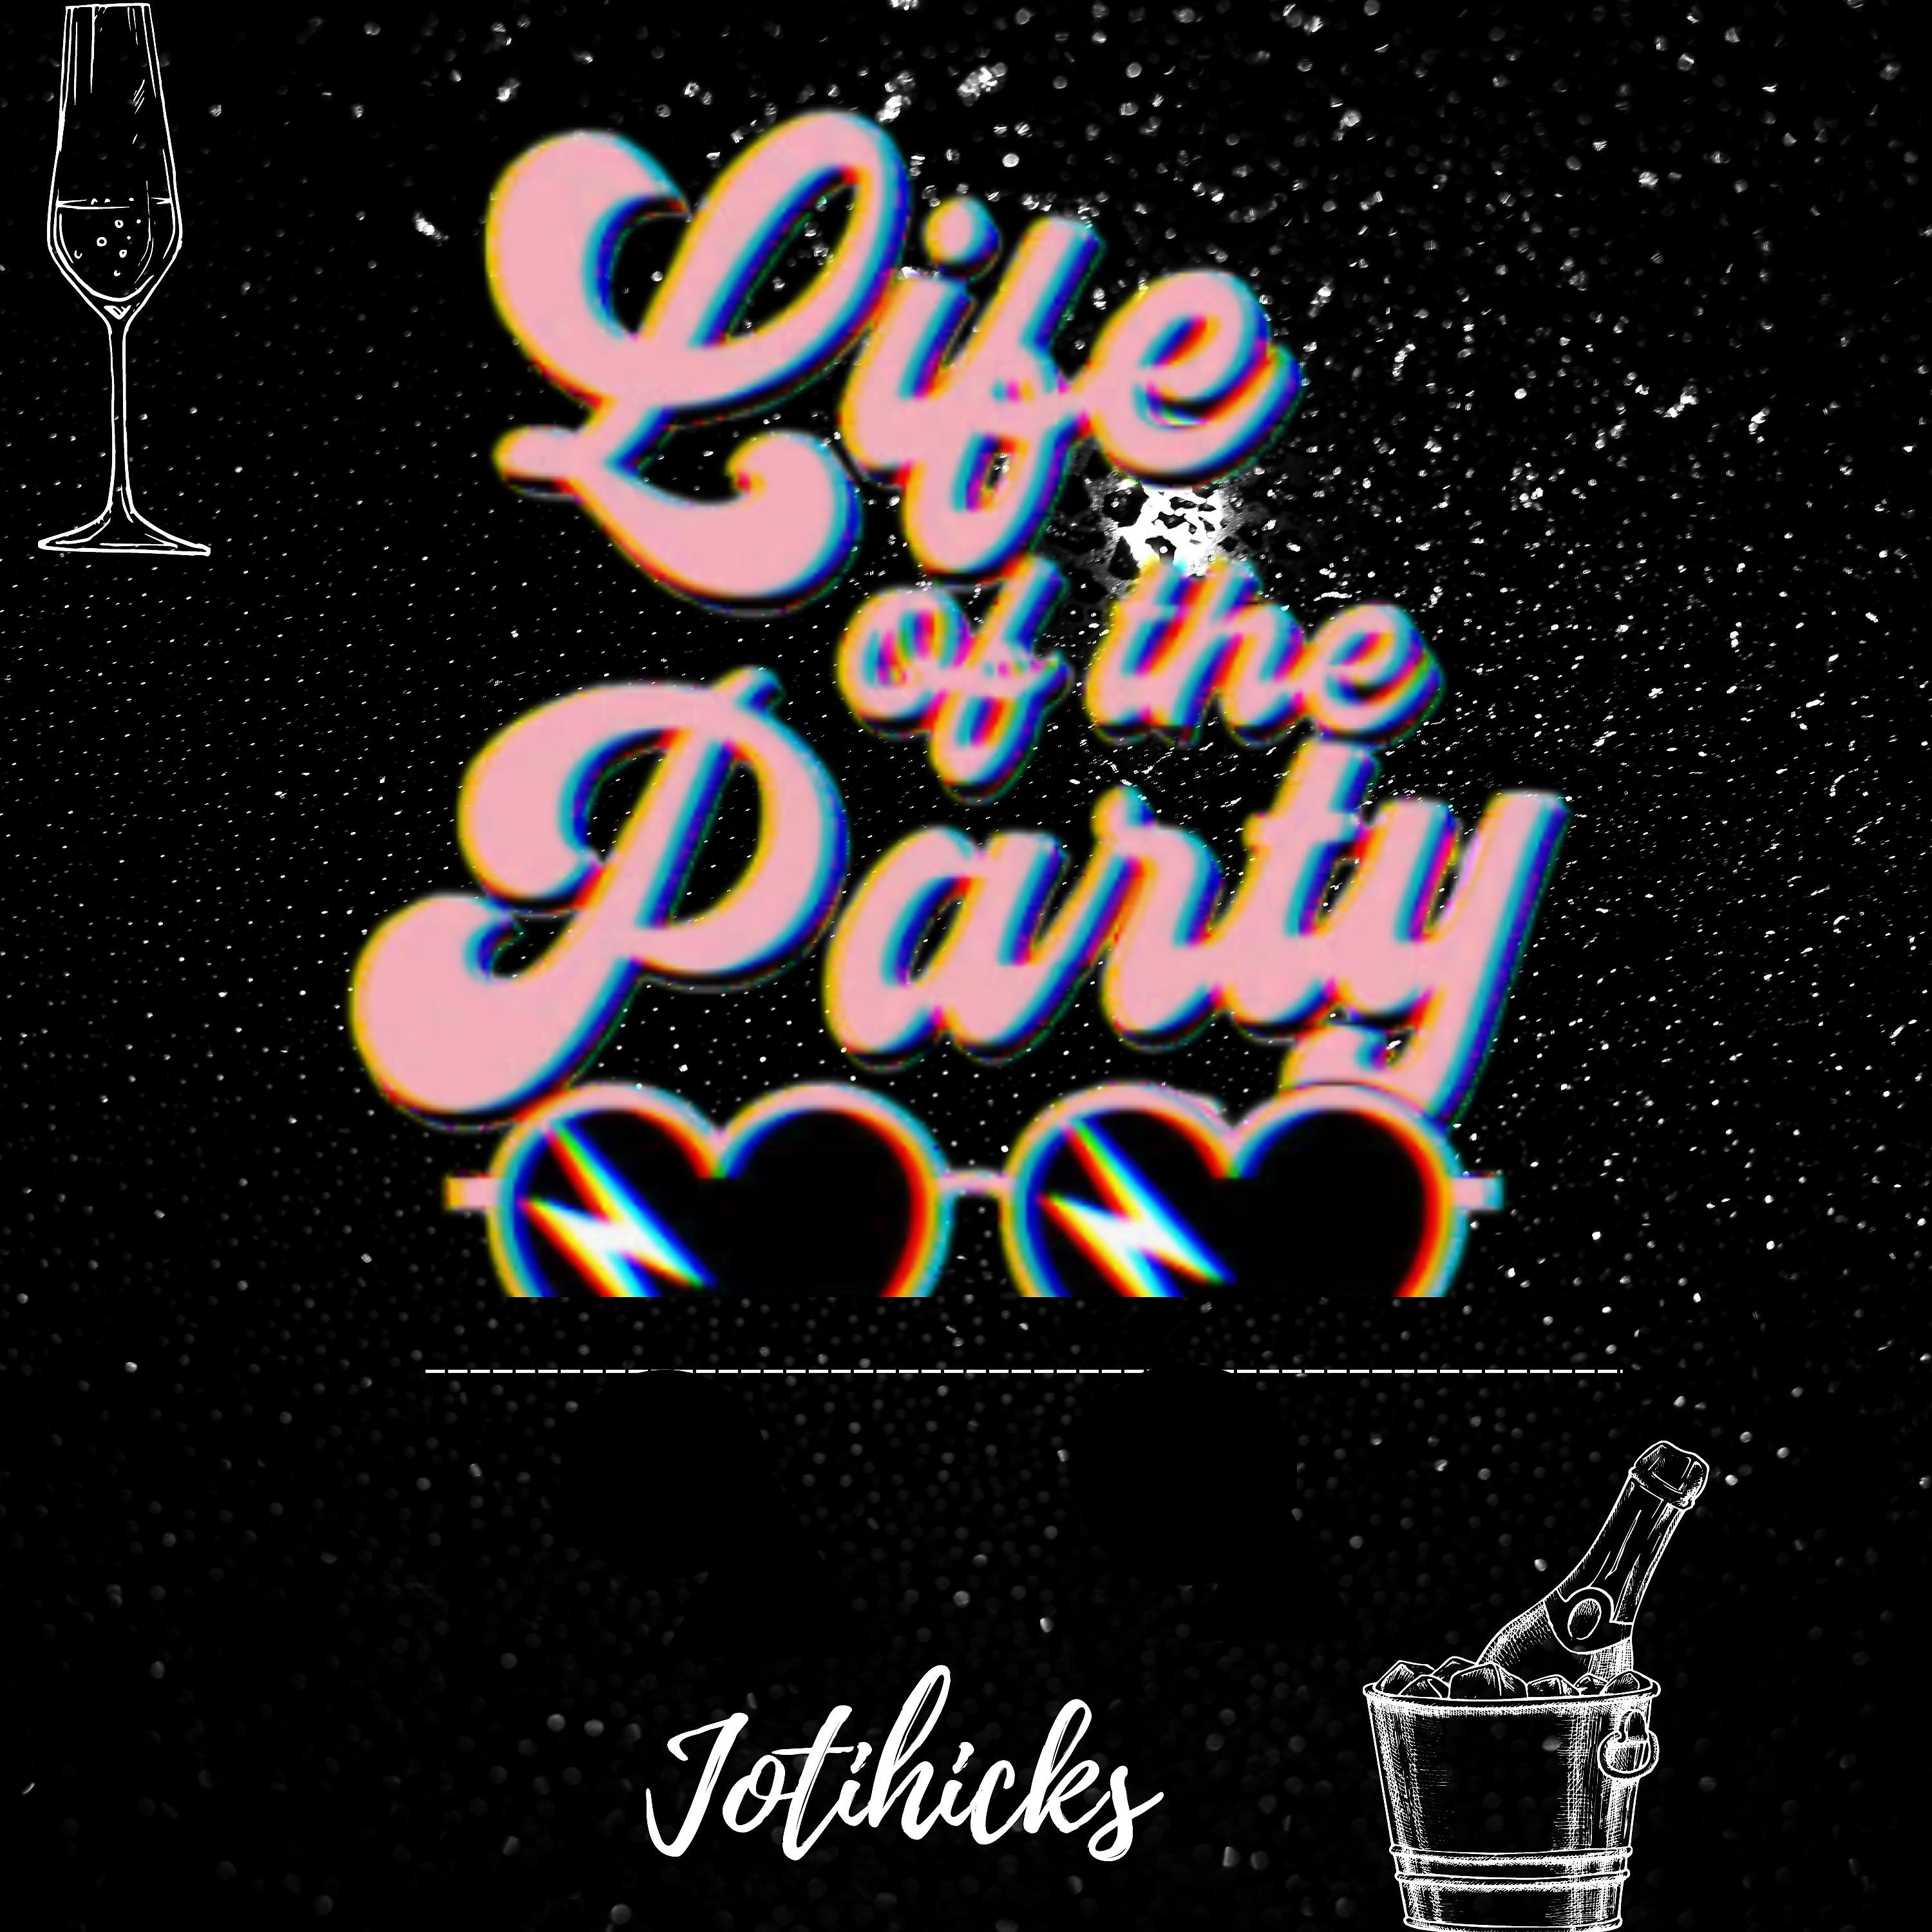 Постер альбома Life of the Party